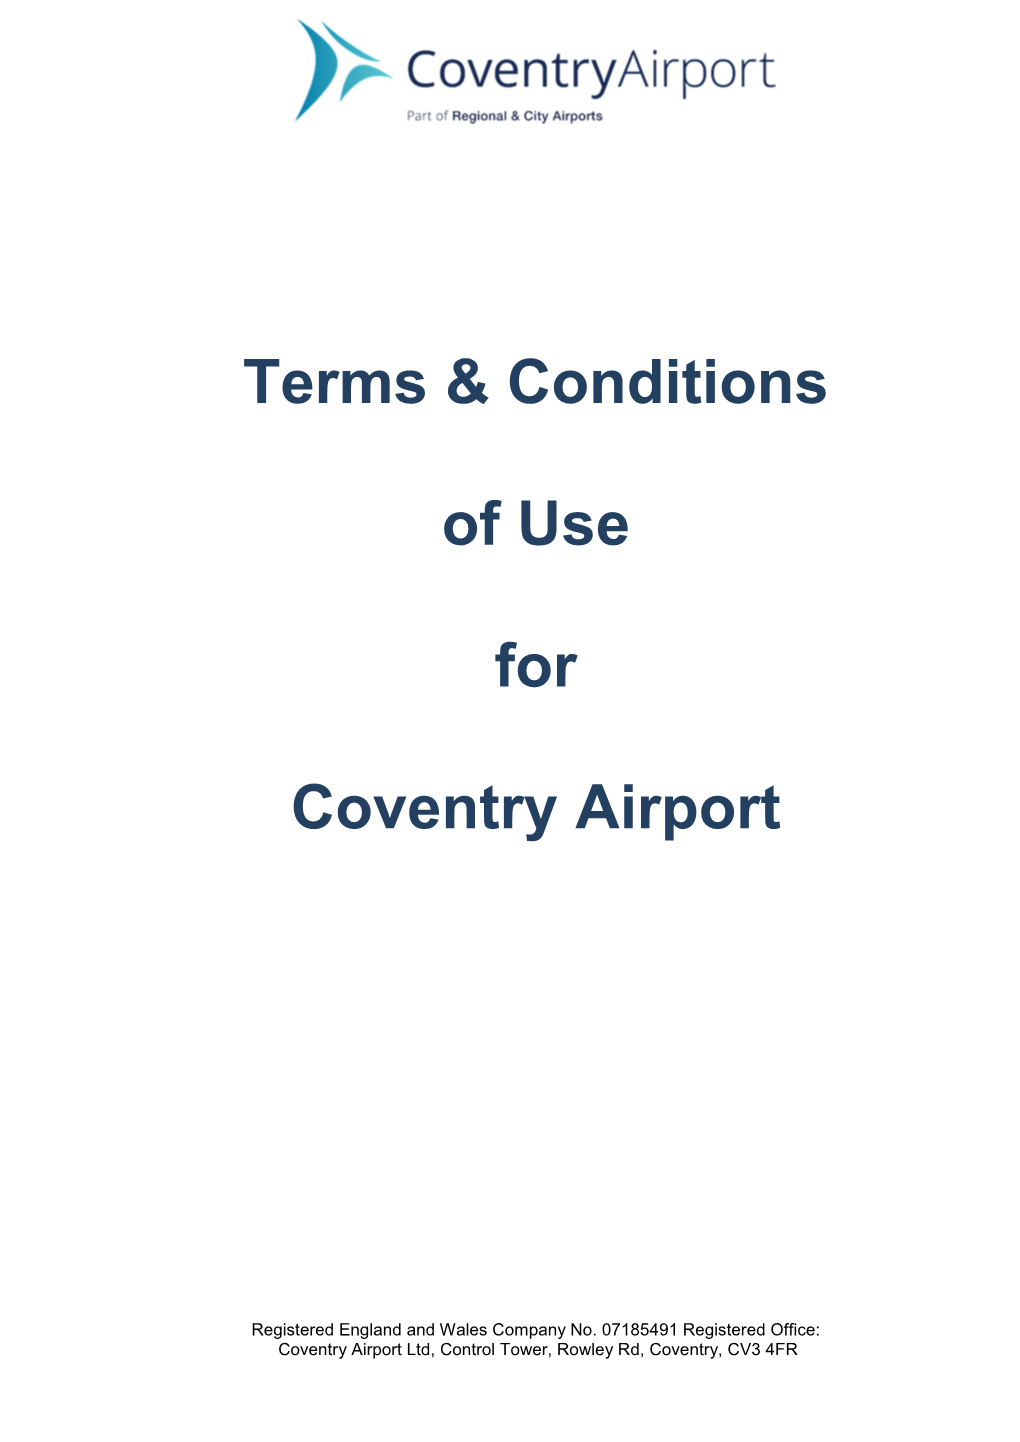 Terms & Conditions of Use for Coventry Airport